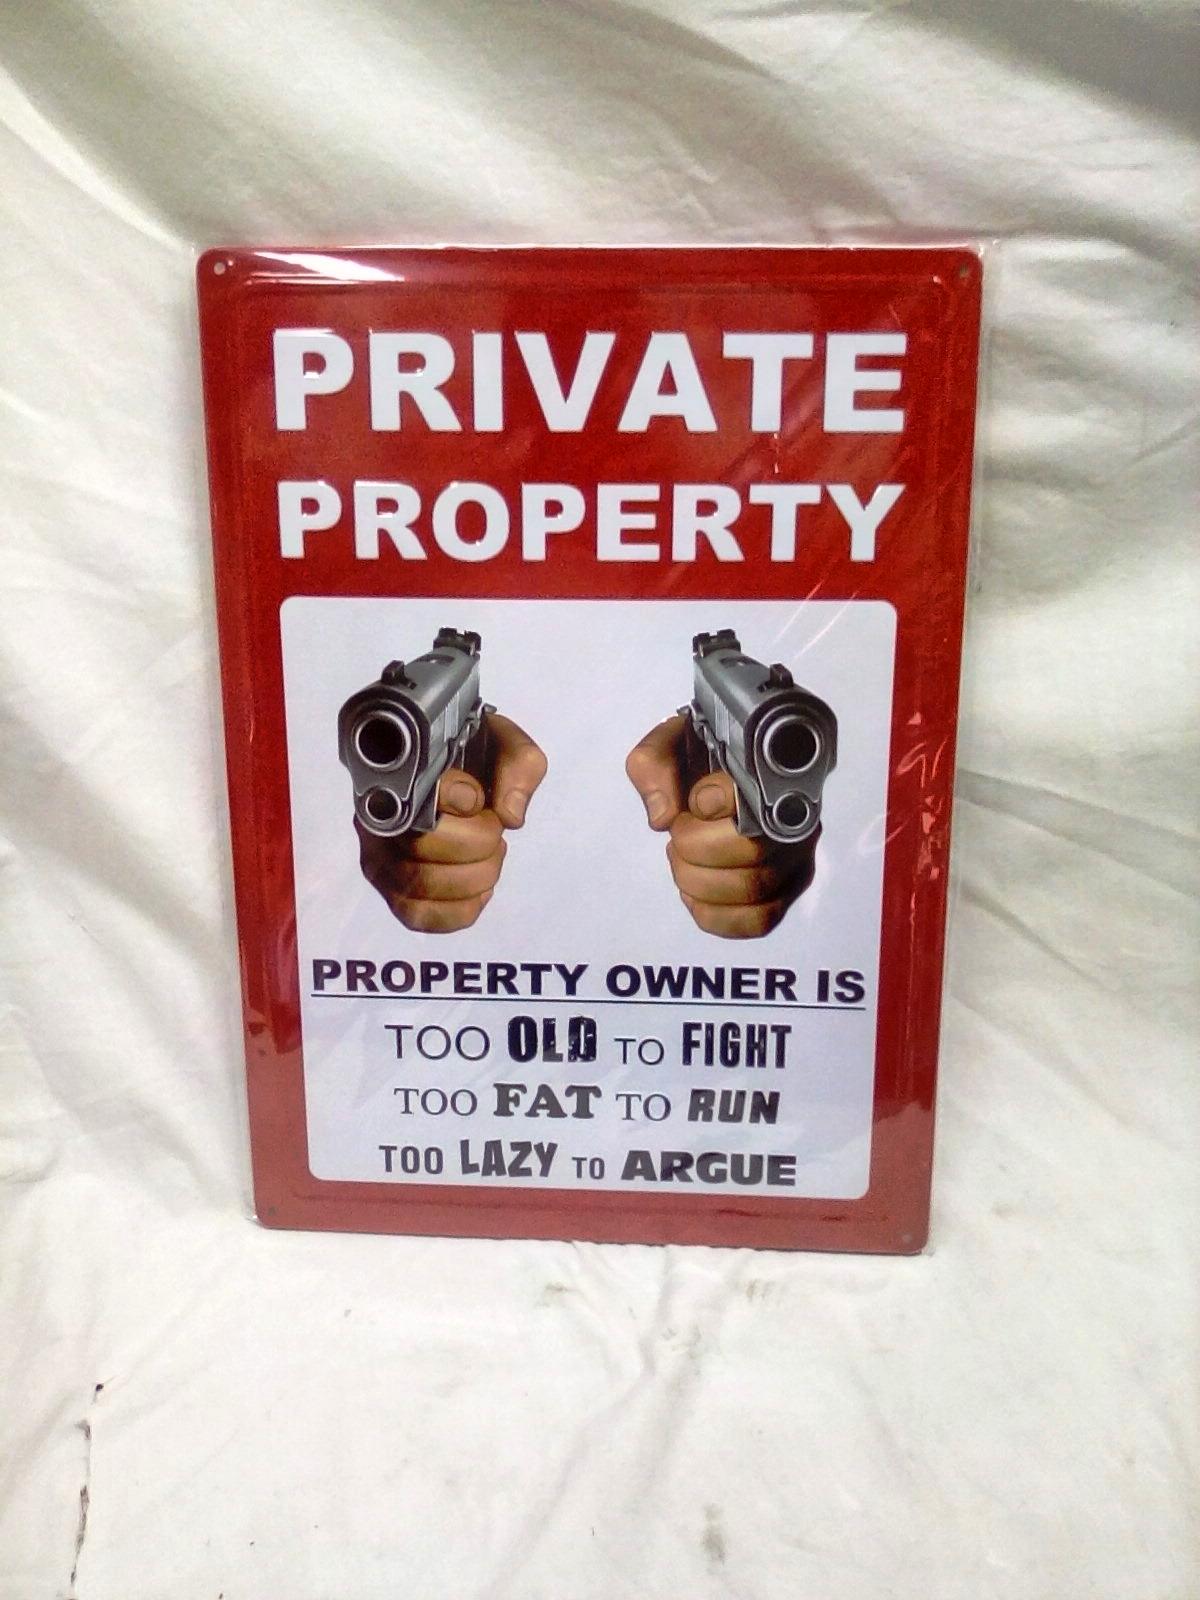 12"x17" Metal Sign "Private Property"